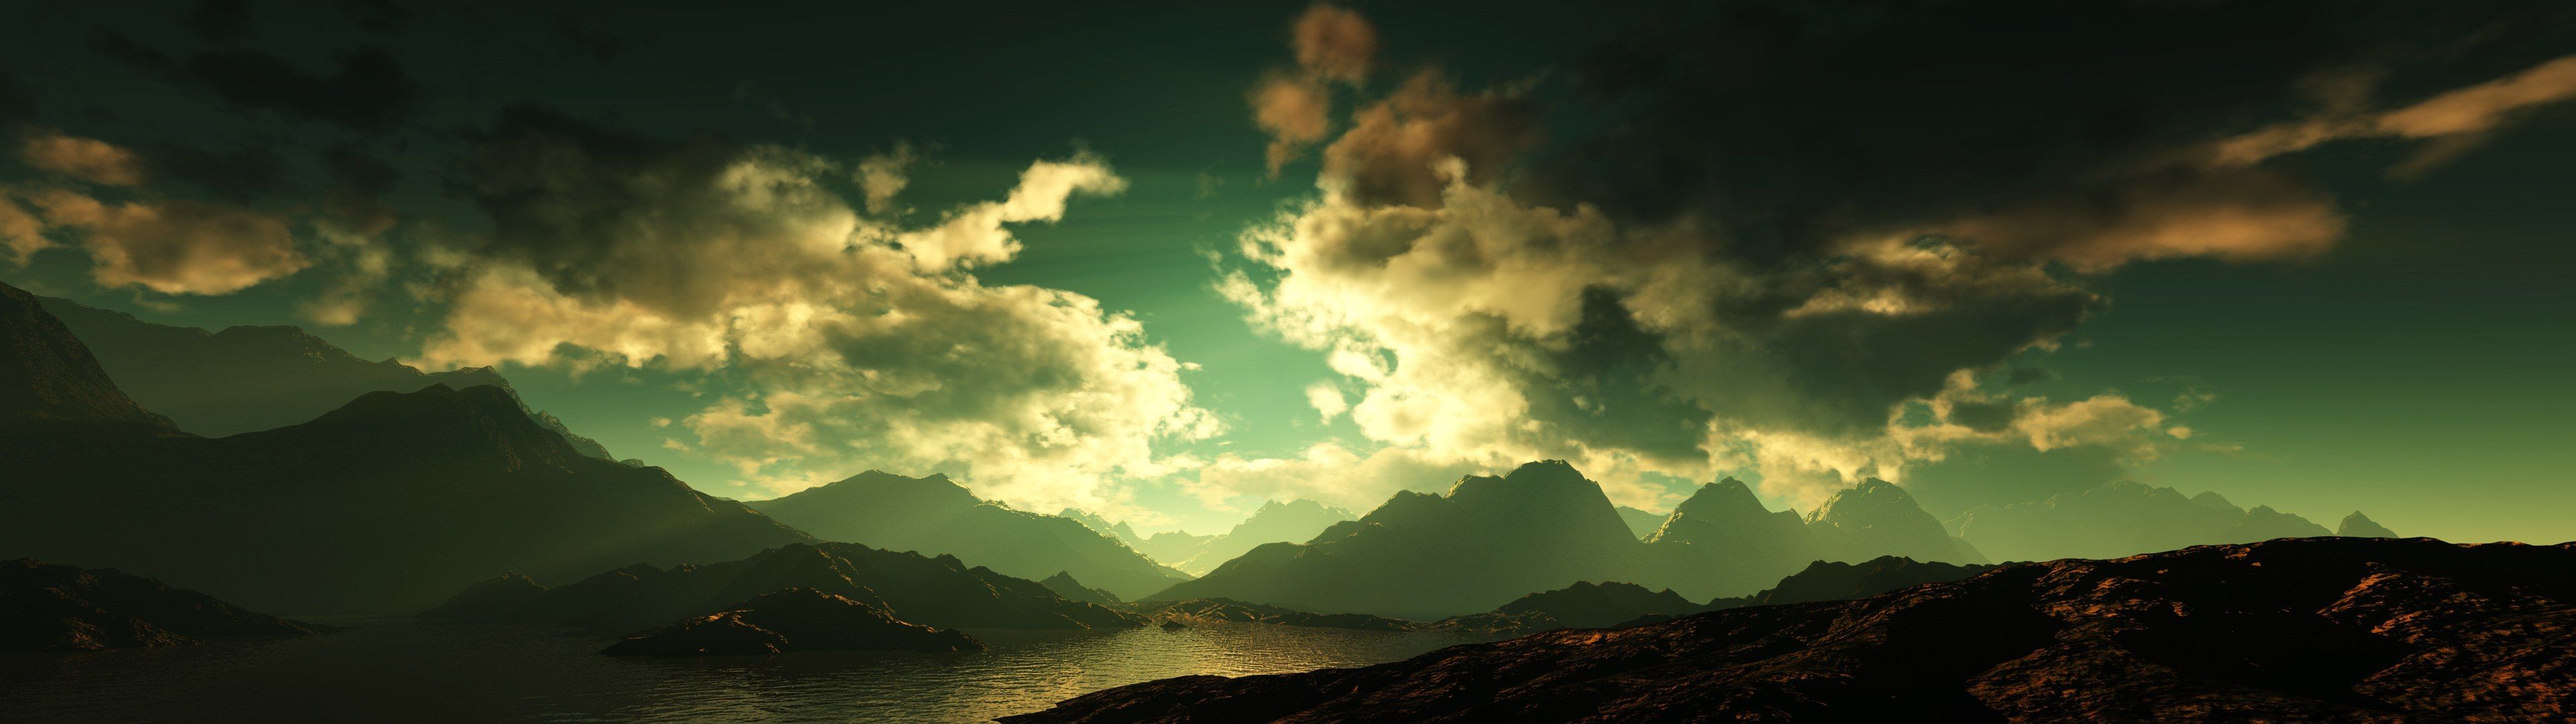 Dual screen wallpaper 3840x1080 - (#42299) - High Quality and ...